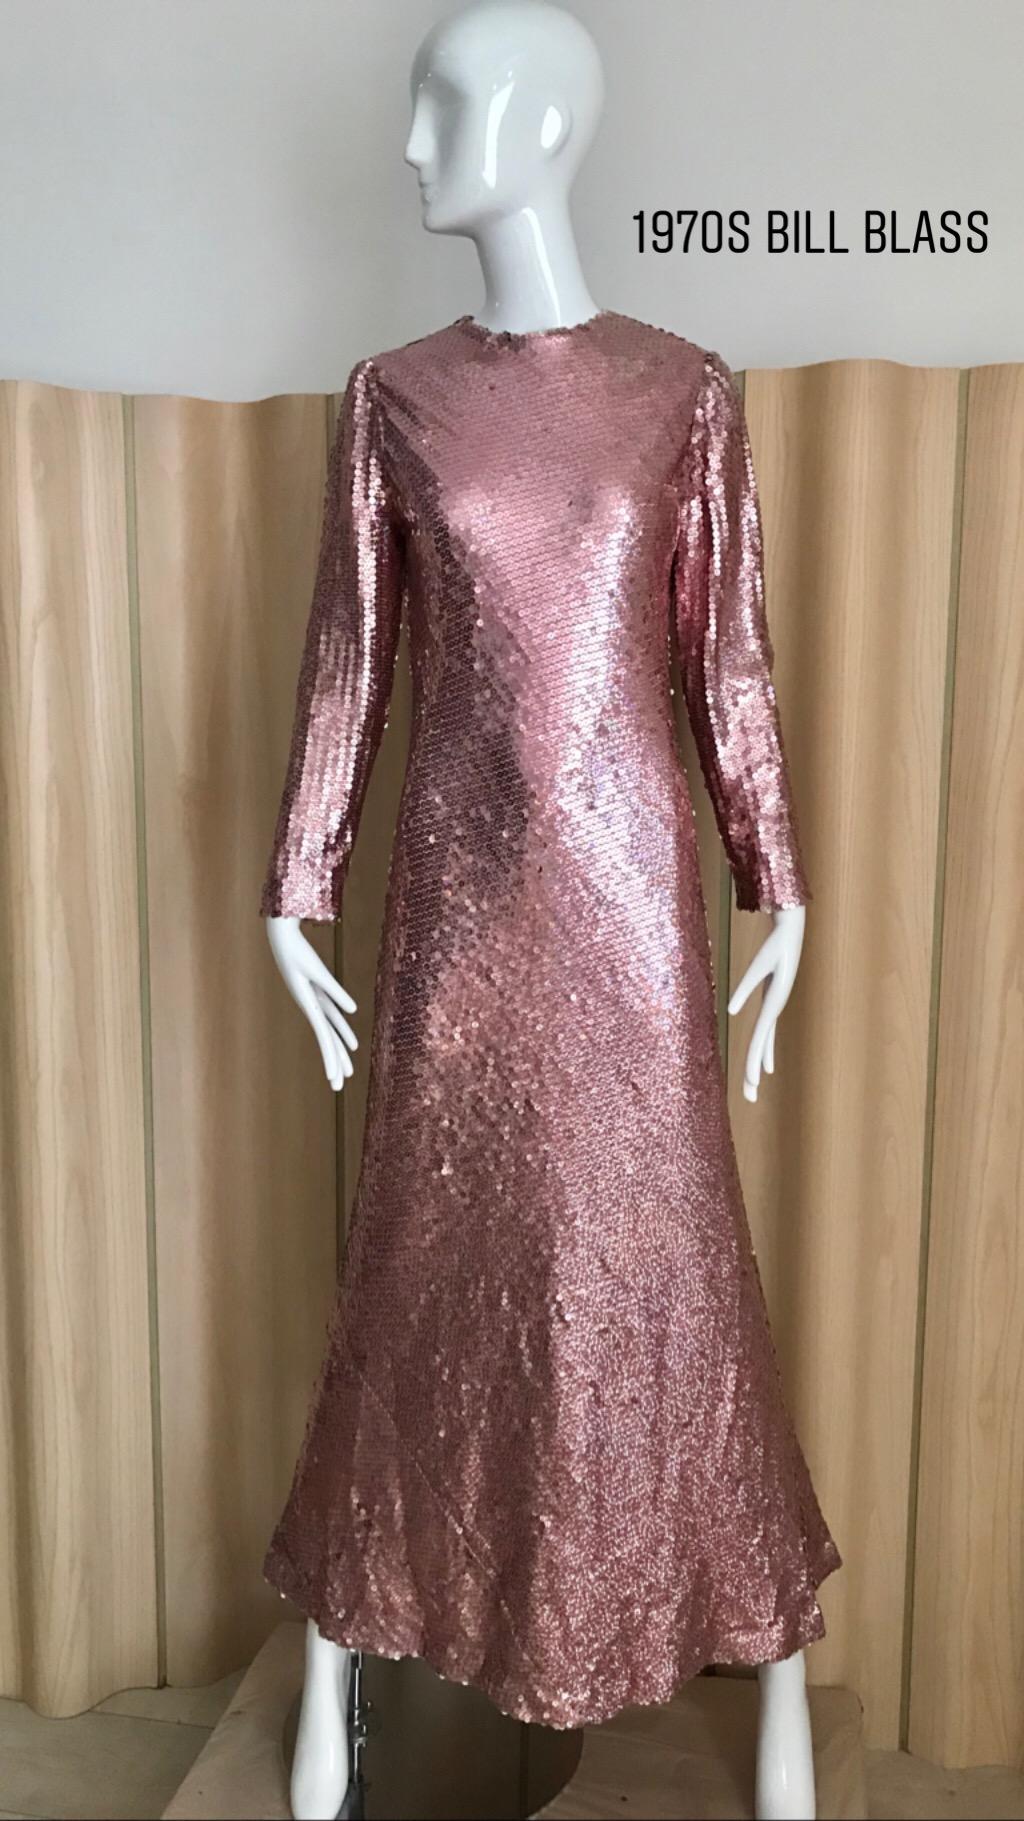 Vintage 70s Bill Blass Pink Metallic Sequin Long Sleeve gown. 
Zipper at the back. Some missing sequins but not significant.
Bust: 36 inches 
Size: SM-MED